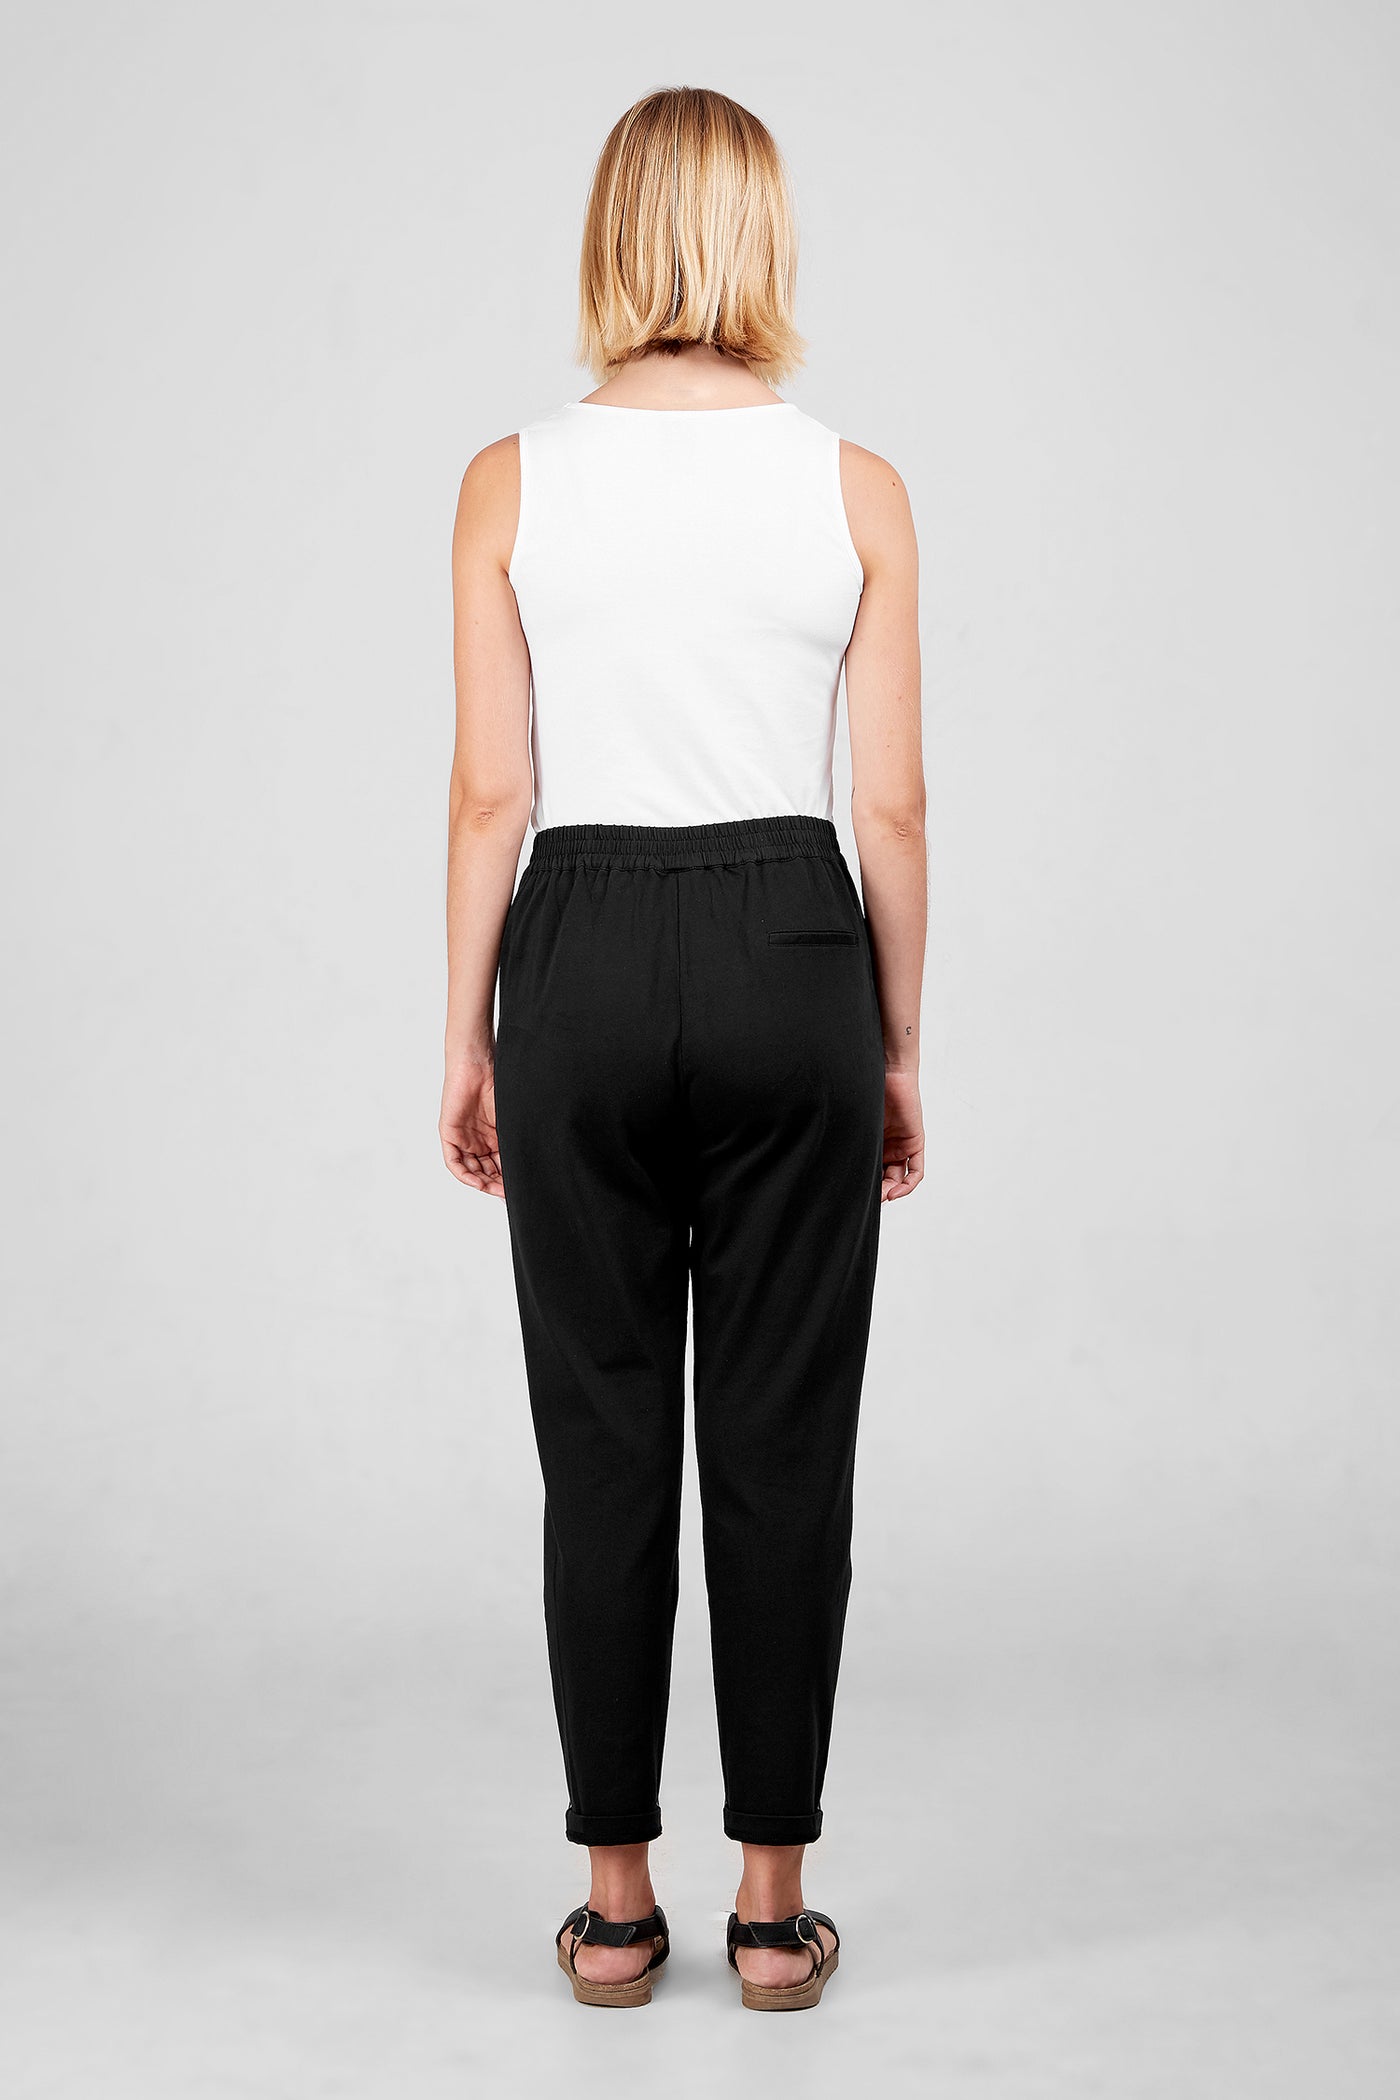 Back view of Dorsu Black Slouch Pant, available on ZERRIN